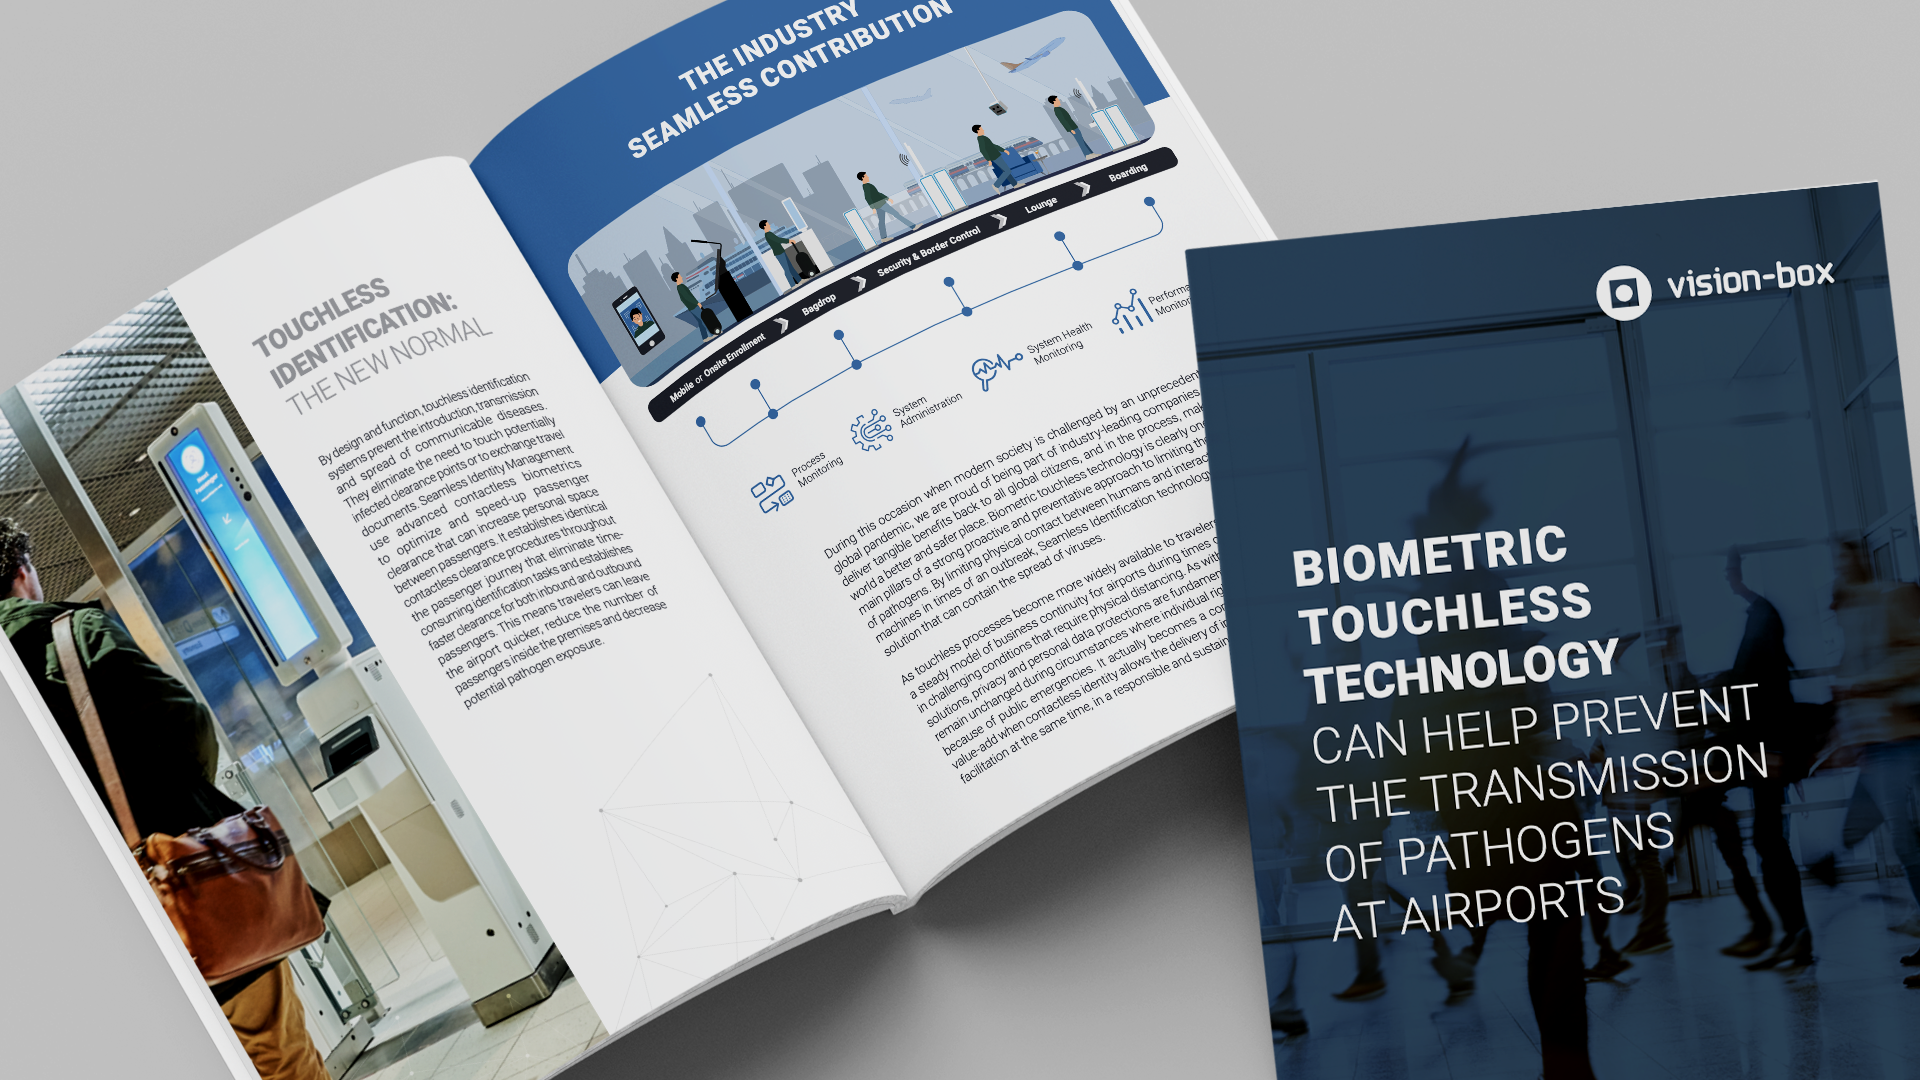 White Paper - Biometric Touchless Technology Can Help Prevent the Transmission of Pathogens at Airports img